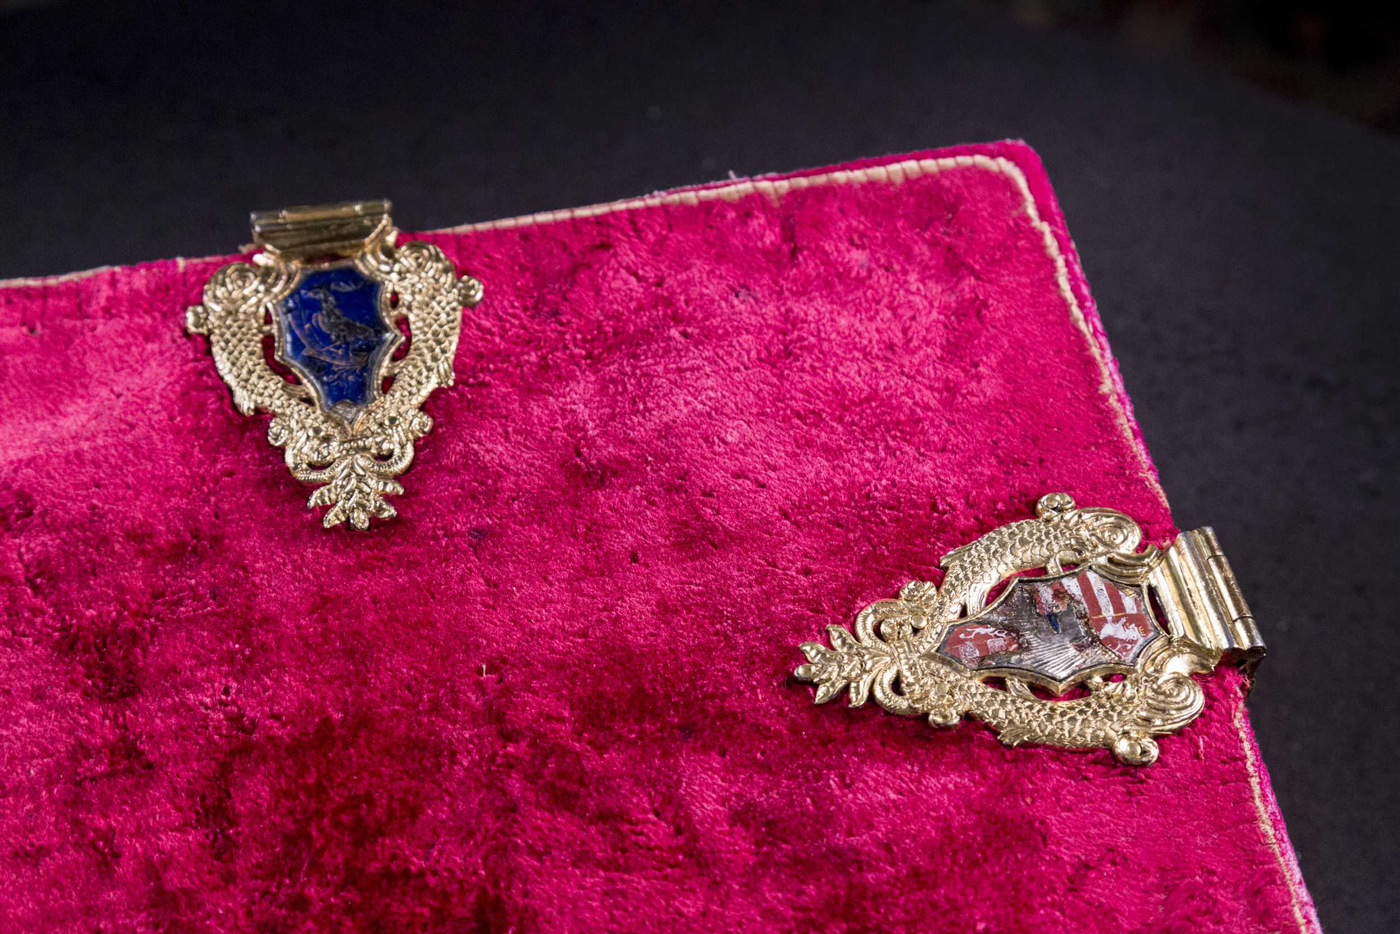 Velvet bindings made in Buda occasionally featured gilded silver clasps, decorated with enamel inlay, just like in the case of Augustinus corvina. Budapest, NSZL, OSZK Cod. Lat. 121. 